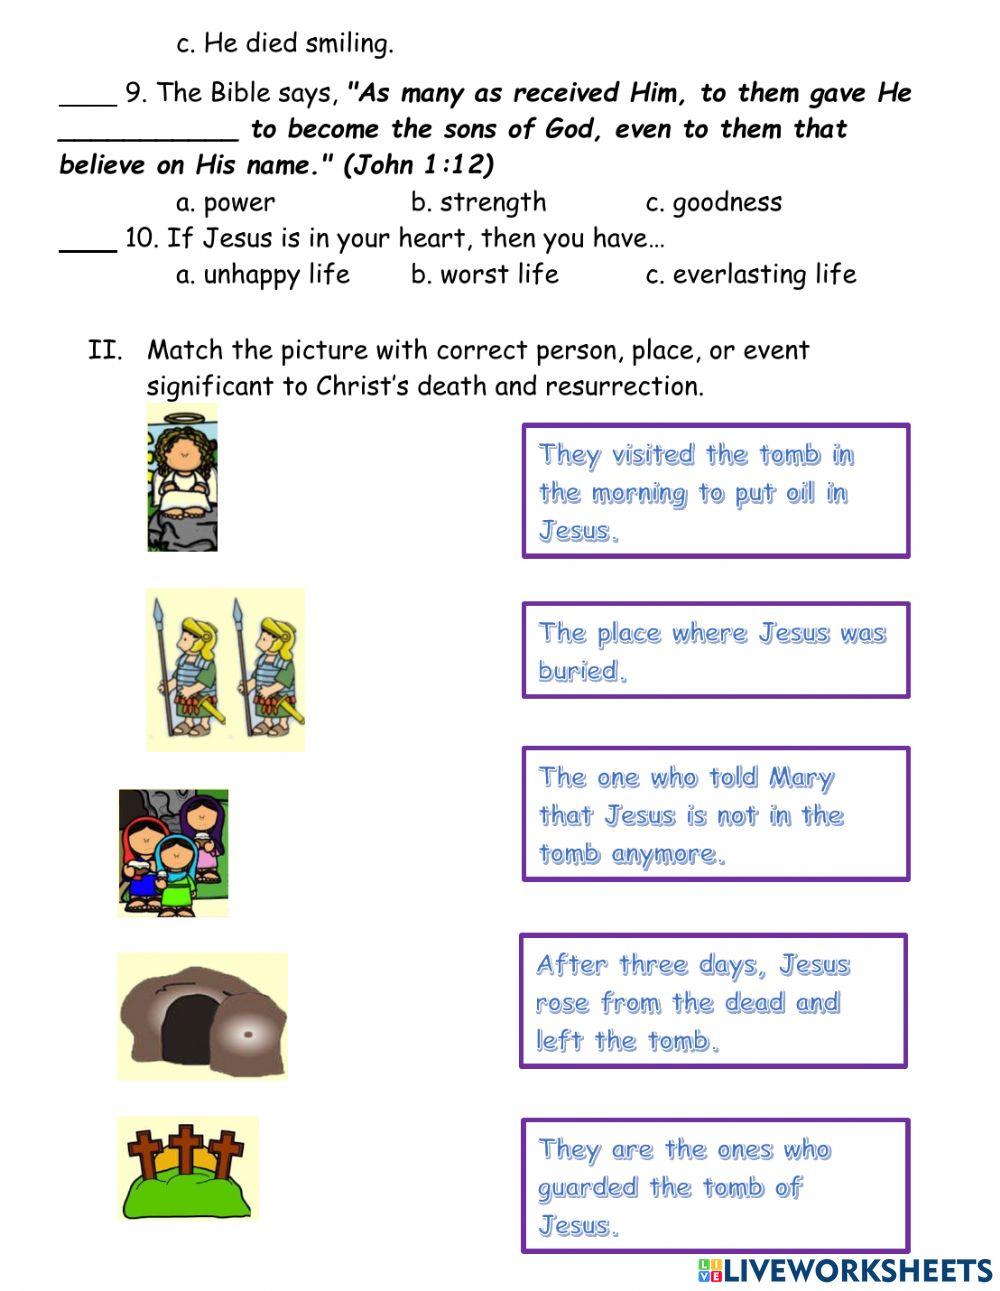 ESP-CL (KINDER) - QUIZ LESSON 5: YOUR HAND WANTS TO TELL A STORY - PART 2